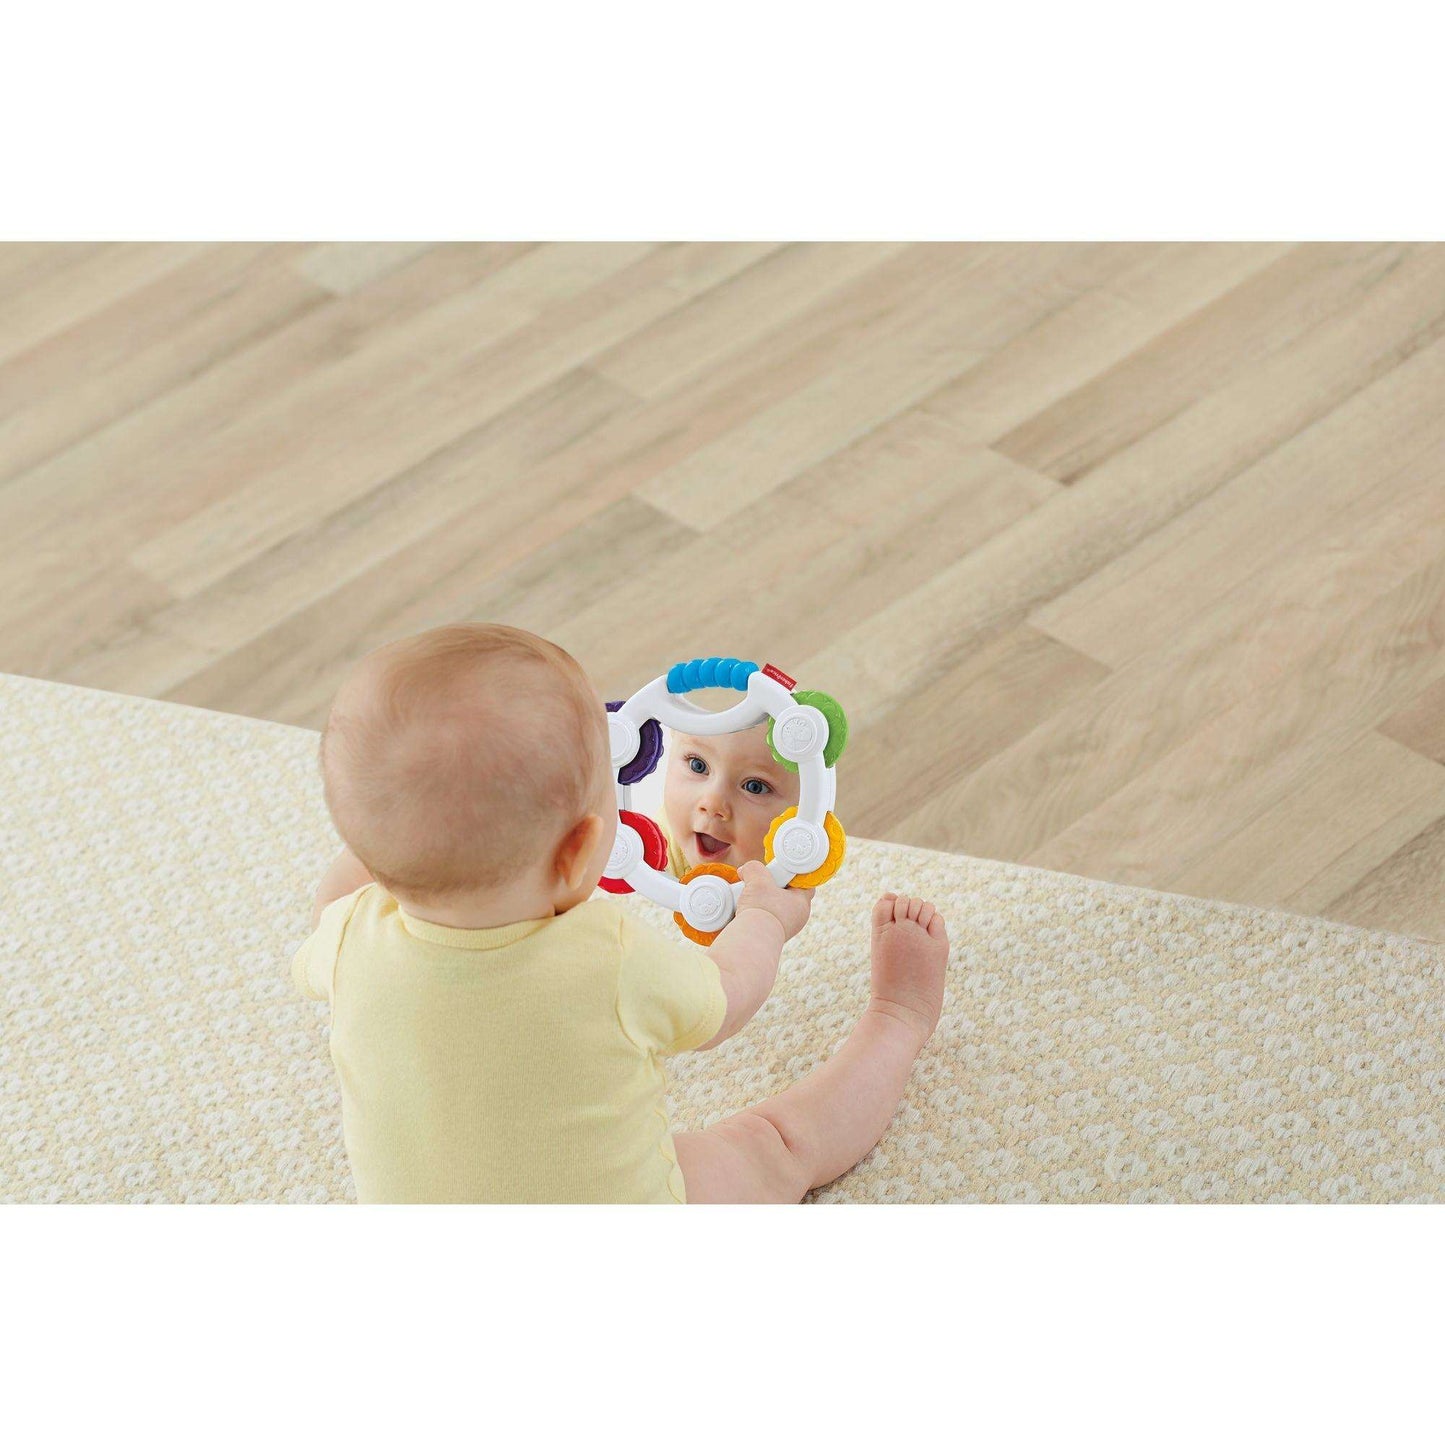 Fisher-Price Shake 'n Beats Tambourine Rattle With Bright colors, clacker sounds and a large, shiny mirror